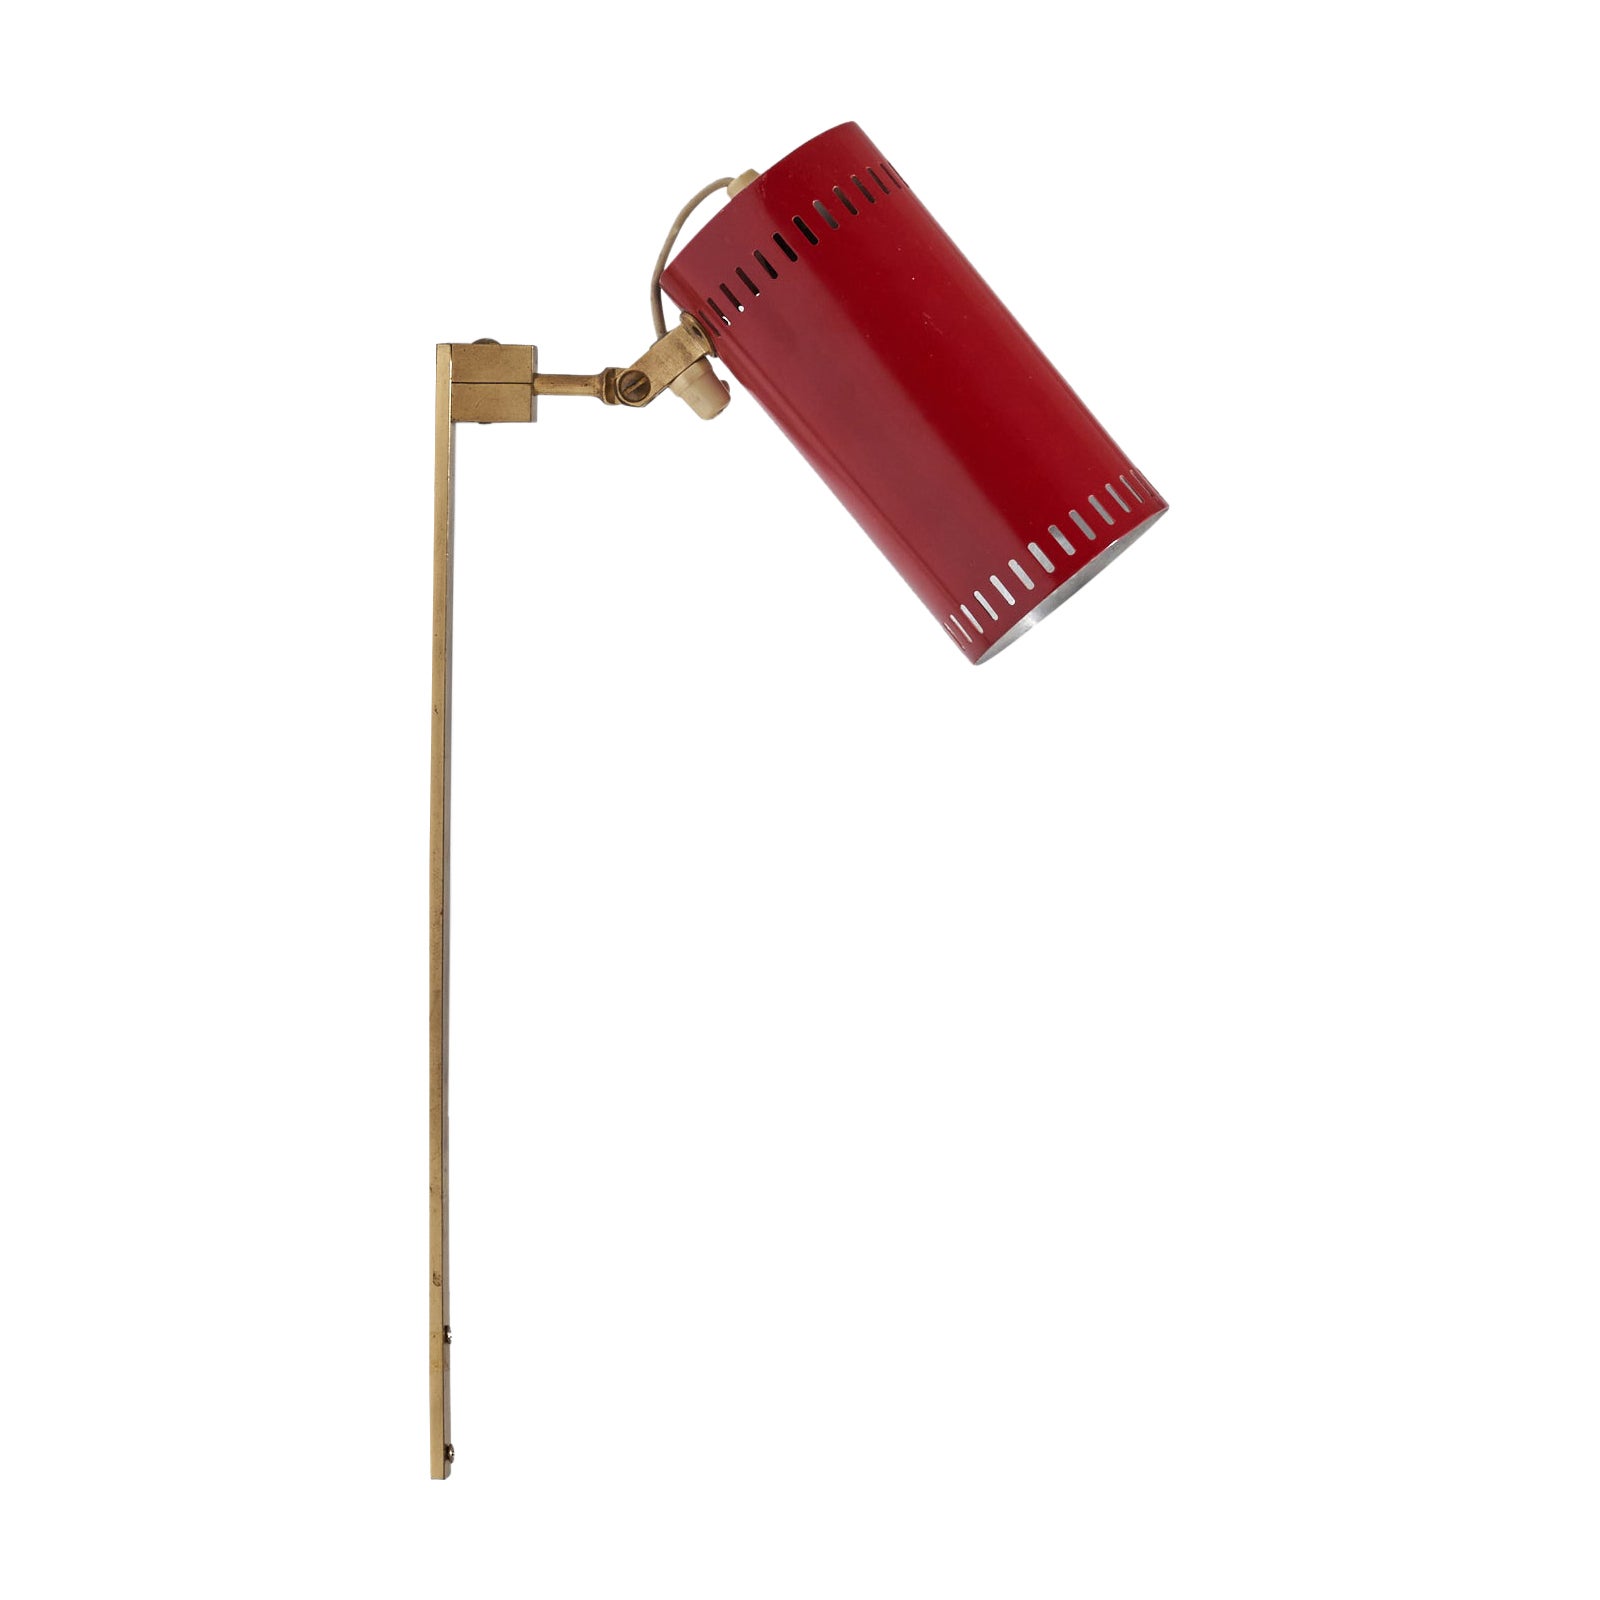 Öia, Adjustable Sconce, Brass, Red Lacquered Metal, Sweden, 1960s For Sale